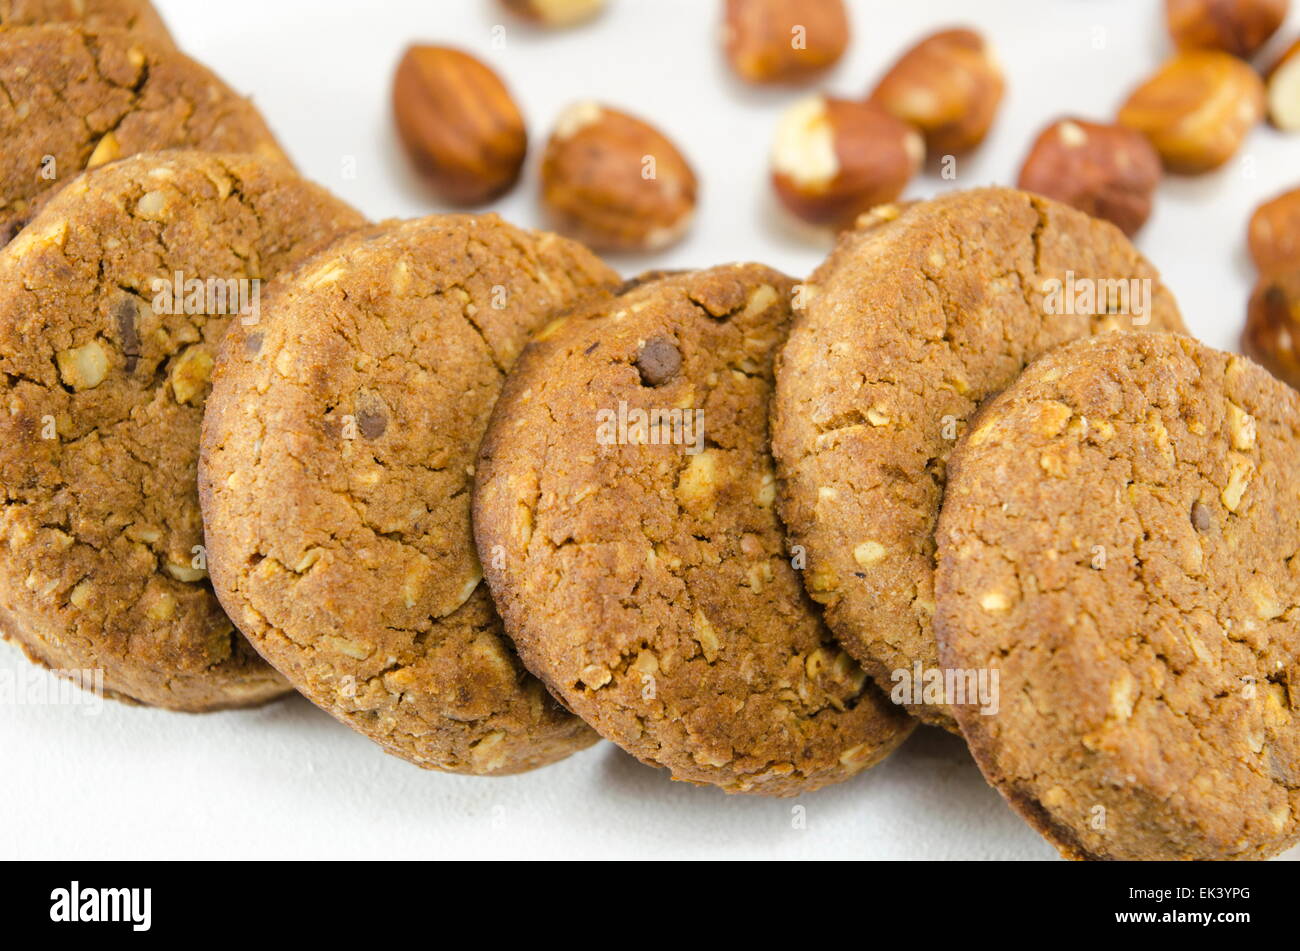 Integral biscuits on white background surrounded with hazelnuts Stock Photo